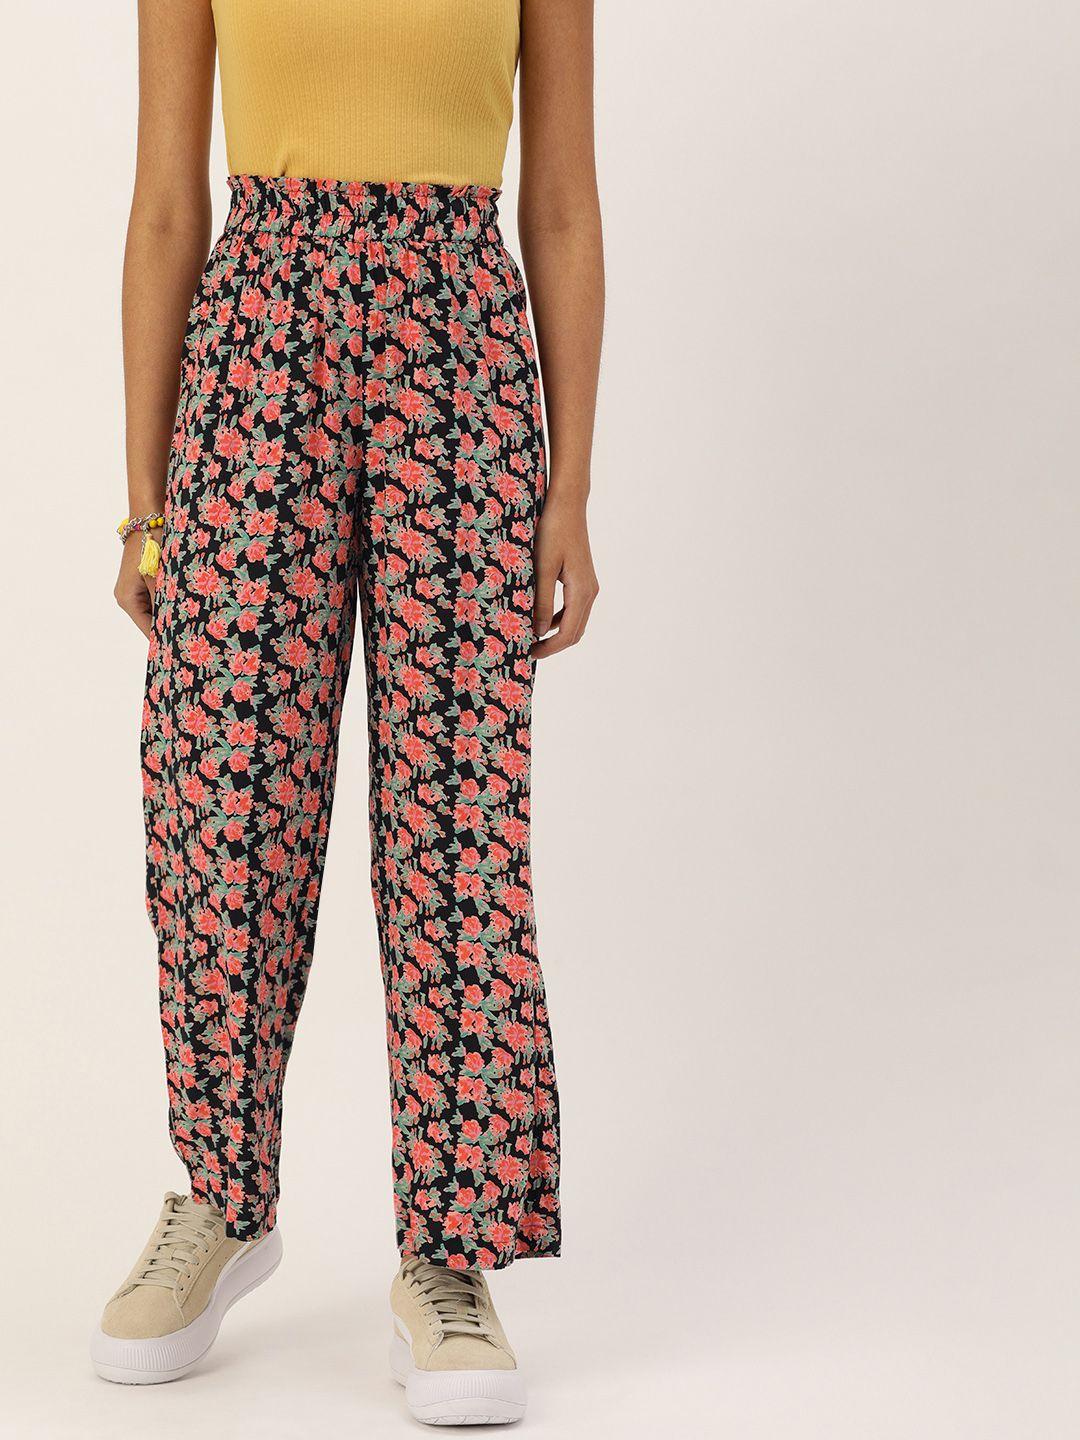 forever 21 women black and orange floral printed trousers